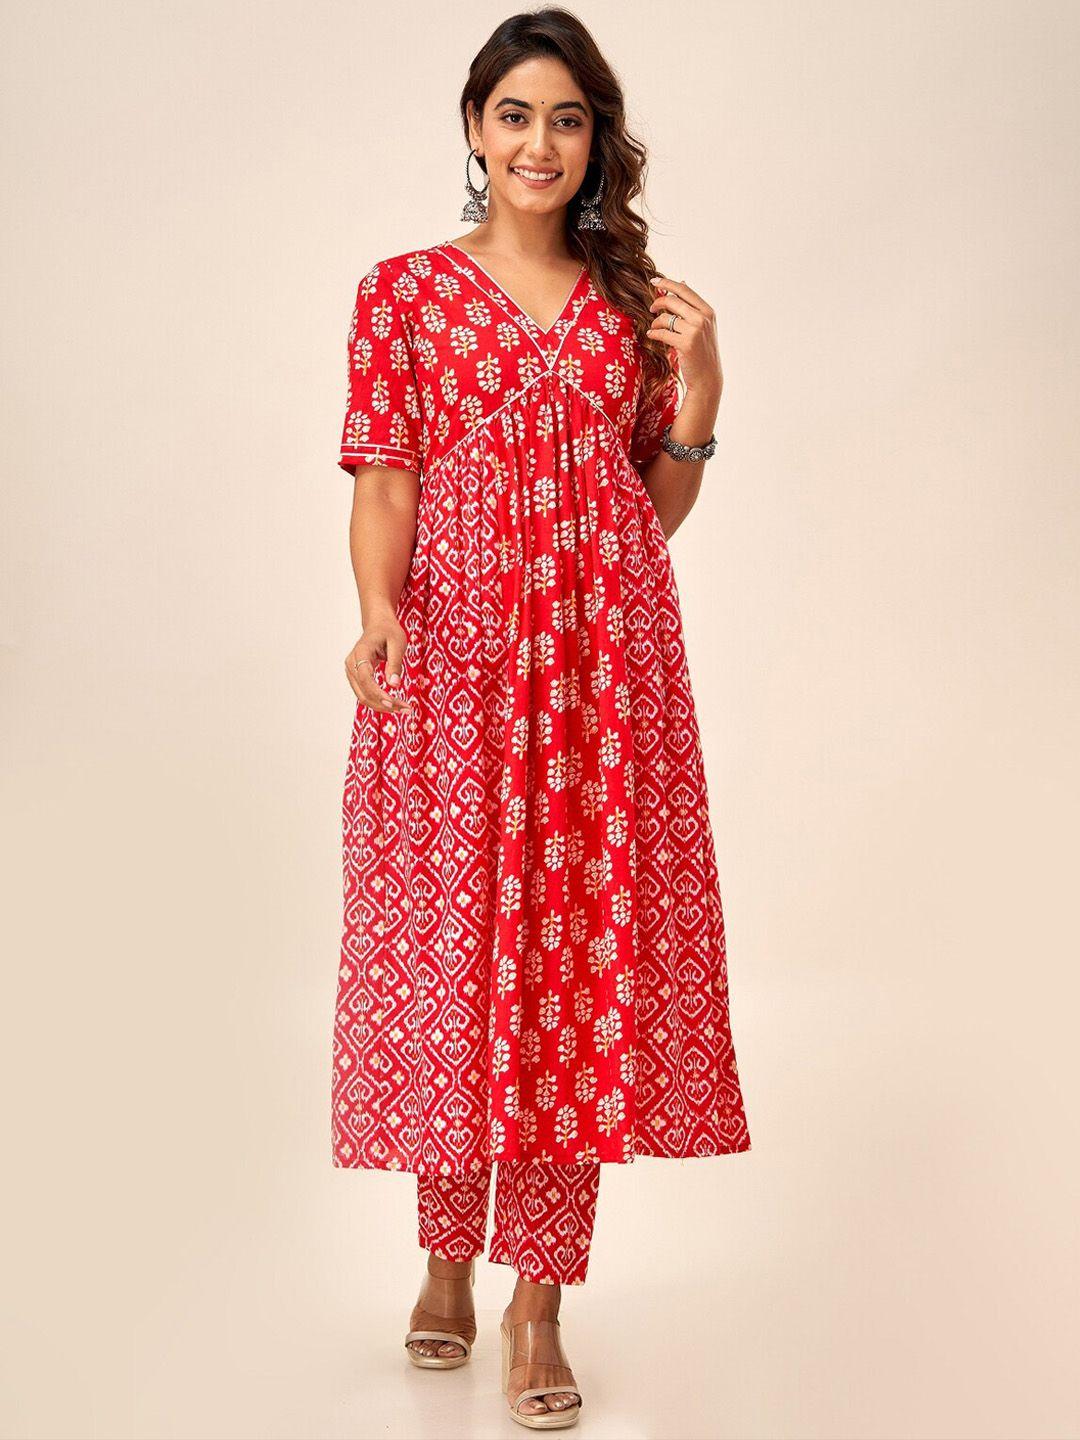 svarchi floral printed empire pure cotton anarkali kurta with trousers